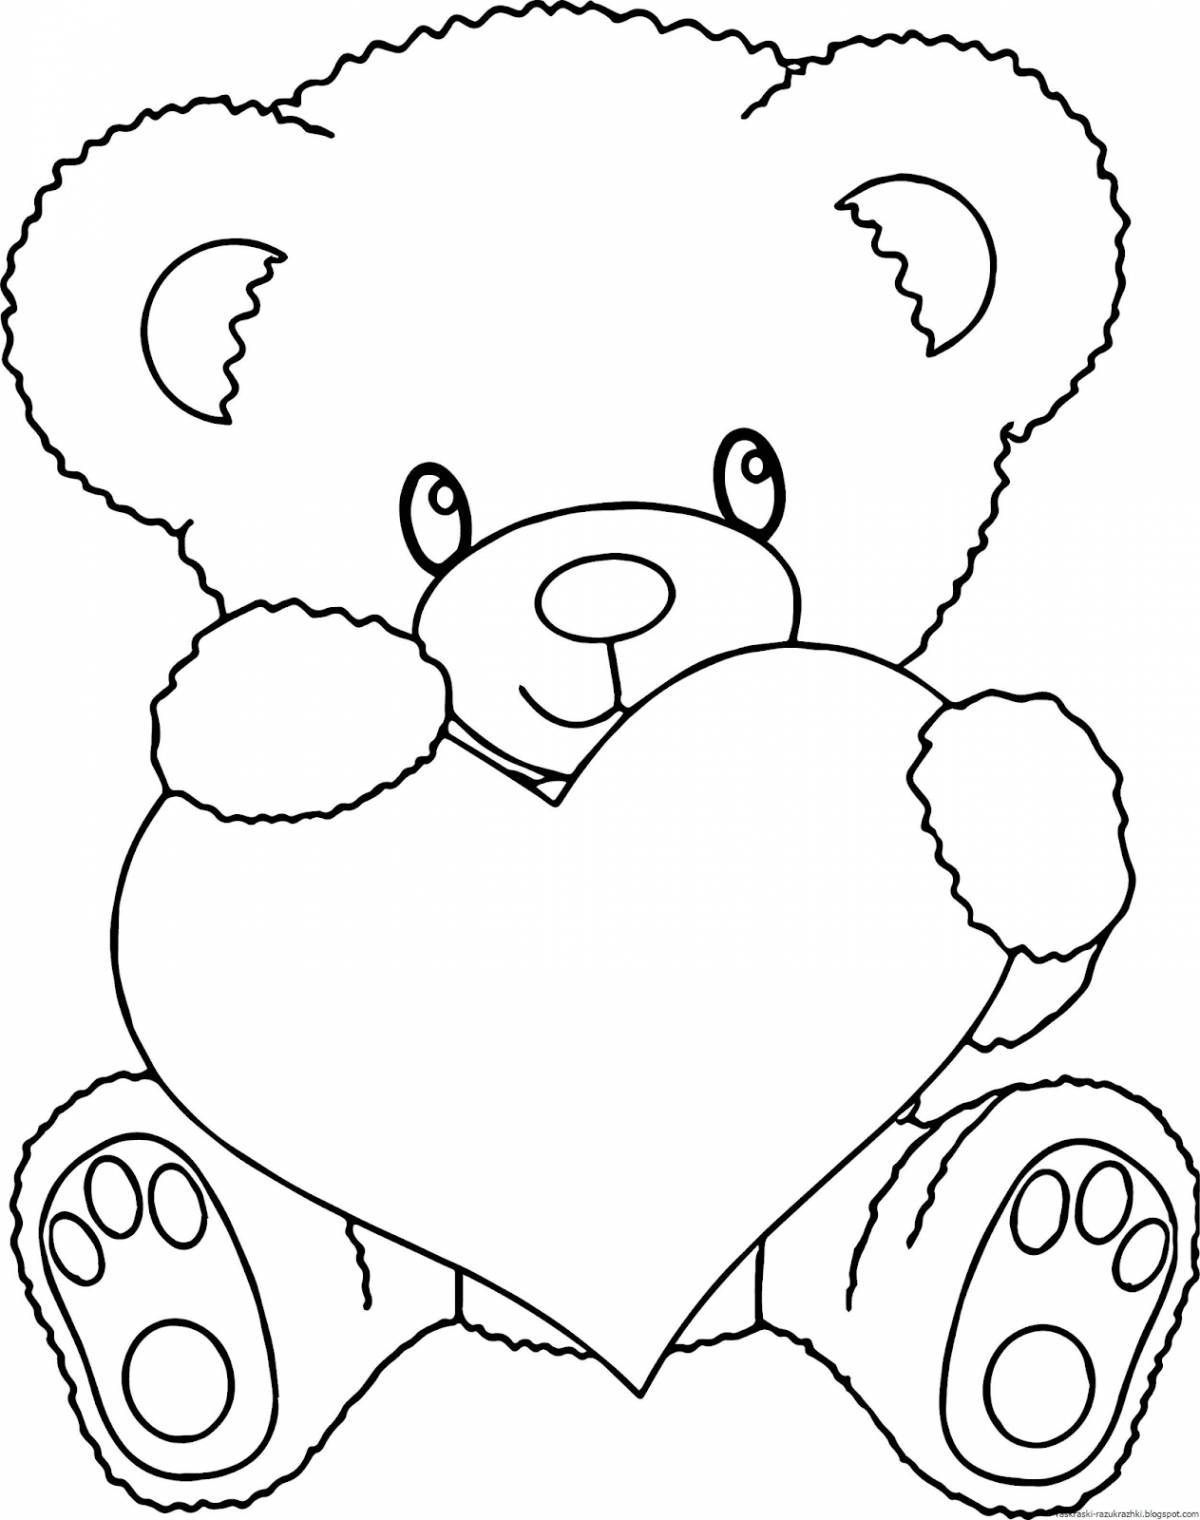 Coloring playful teddy bear with a heart